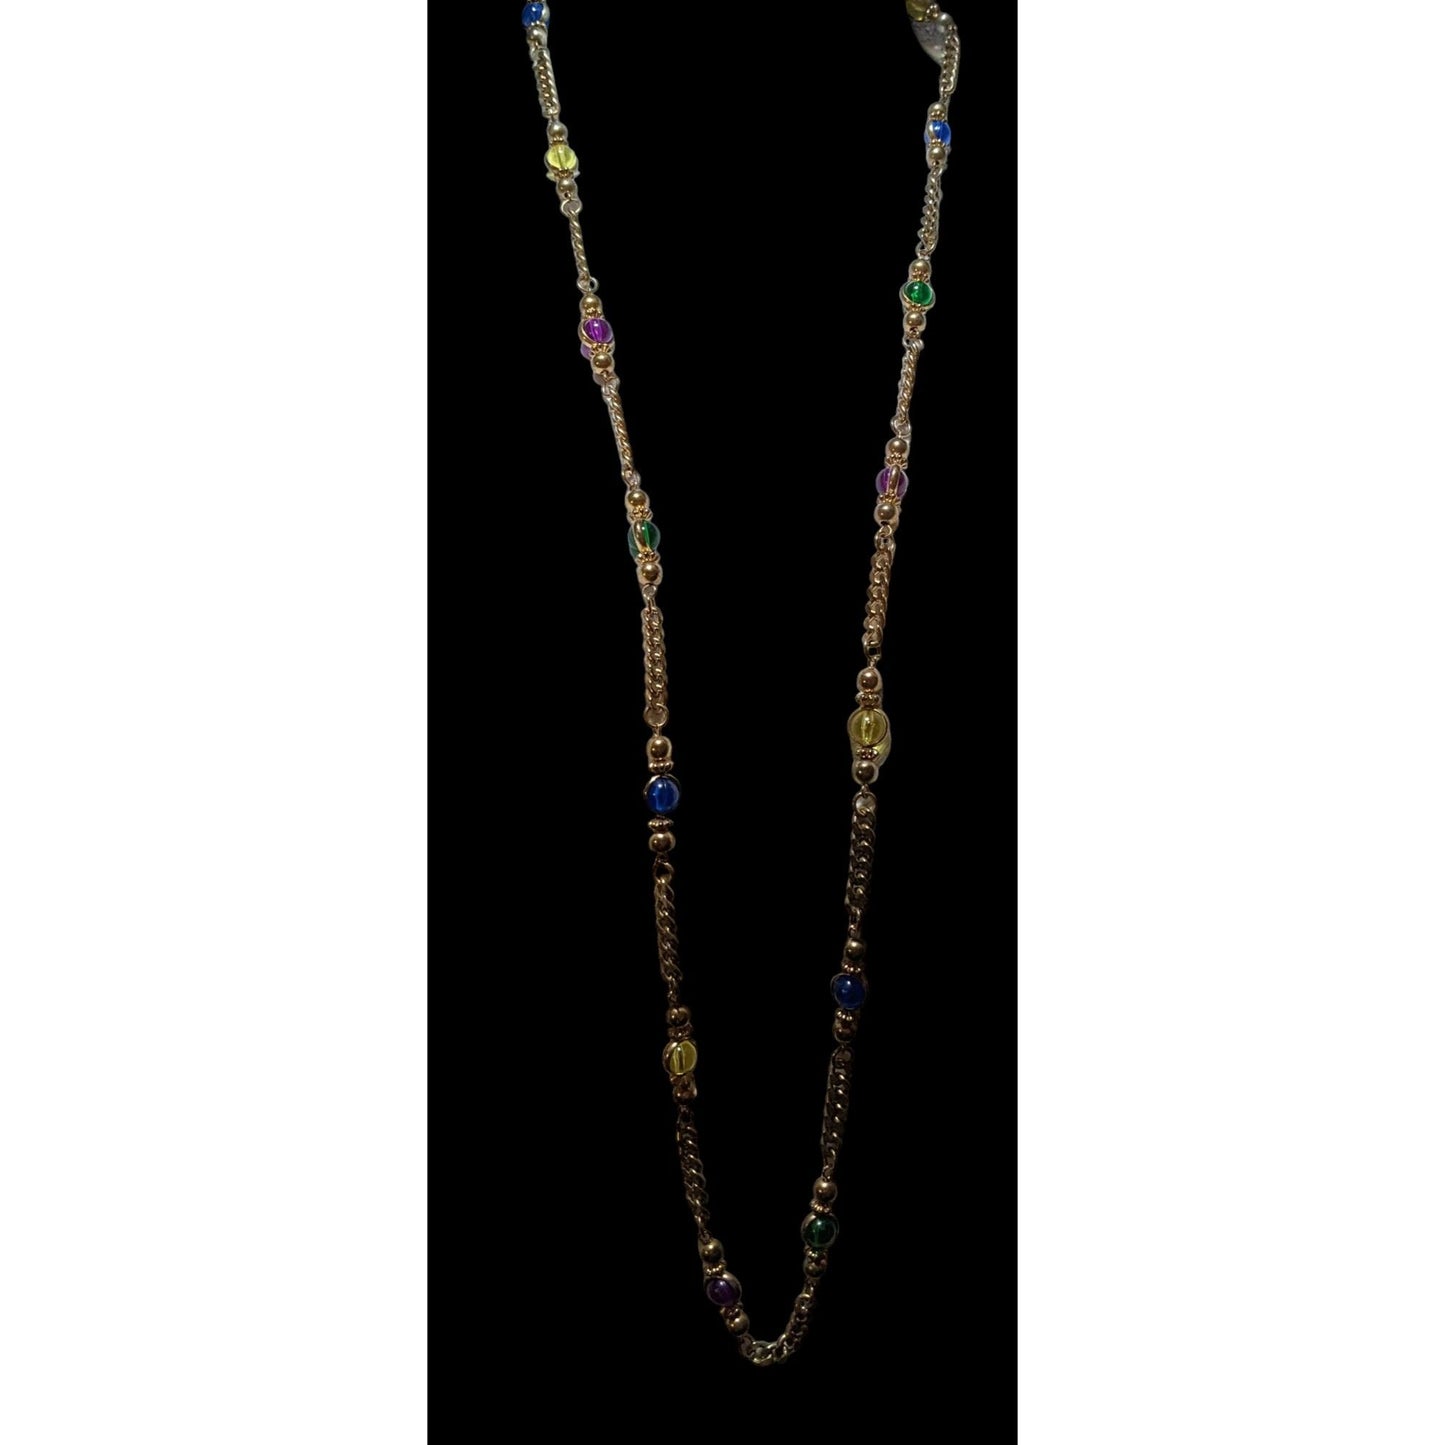 Regal Rainbow Gold Chain Necklace